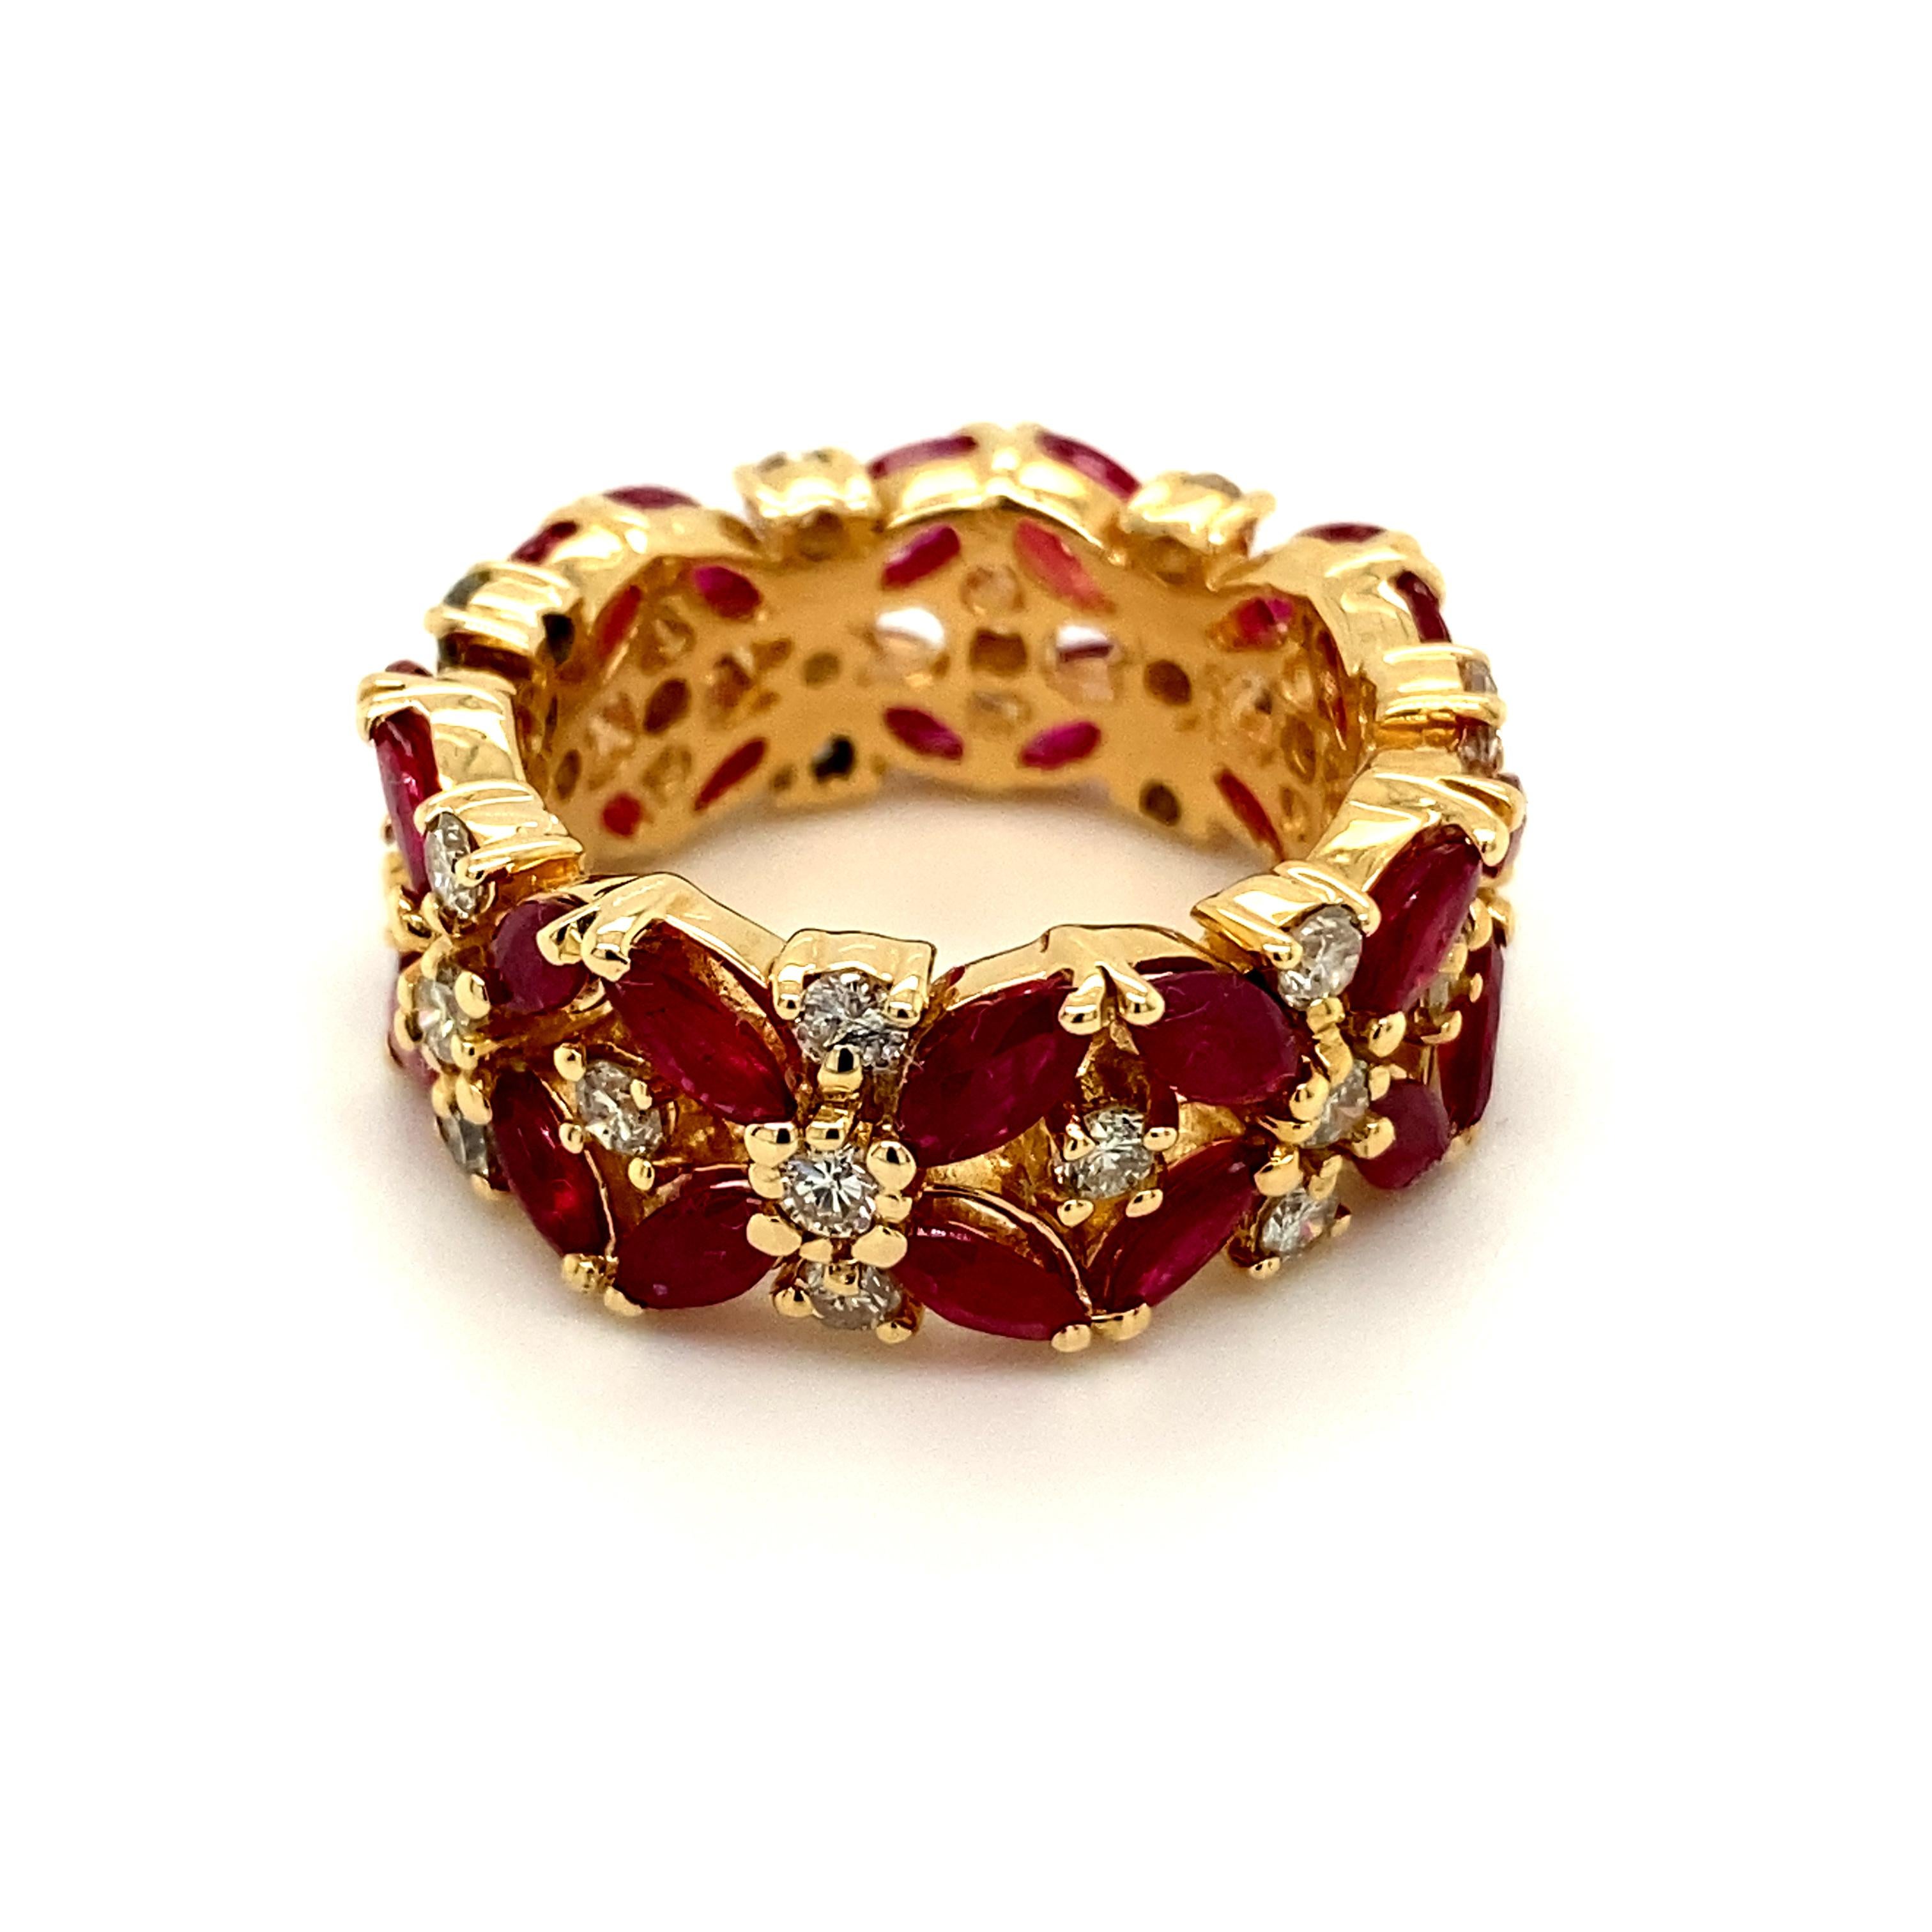 6.75 Carat Natural Diamond and Ruby Ring Band G SI 14K Yellow Gold

100% Natural Diamonds and Rubies
6.75CTW
G-H 
SI  
14K Yellow Gold,  Prong style
Size 7
diamonds - 1.37ct, rubies - 5.38ct

R5638RA

ALL OUR ITEMS ARE AVAILABLE TO BE ORDERED IN 14K